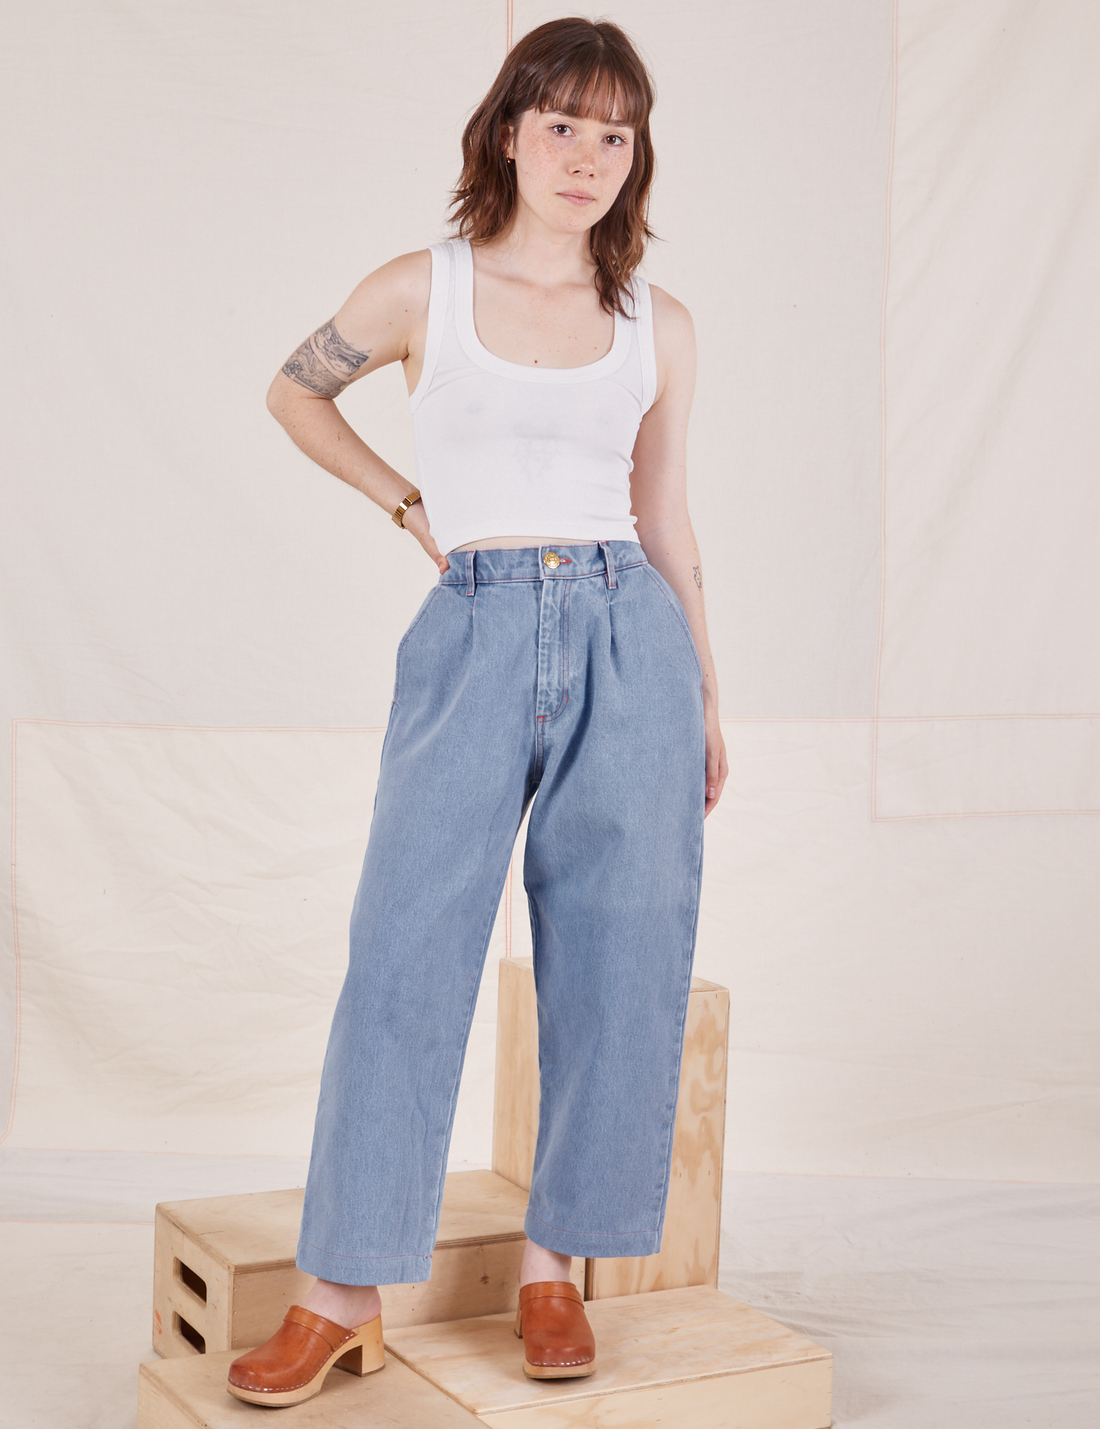 Hana is 5'3" and wearing XXS Petite Denim Trouser Jeans in Light Wash paired with vintage off-white Cropped Tank Top